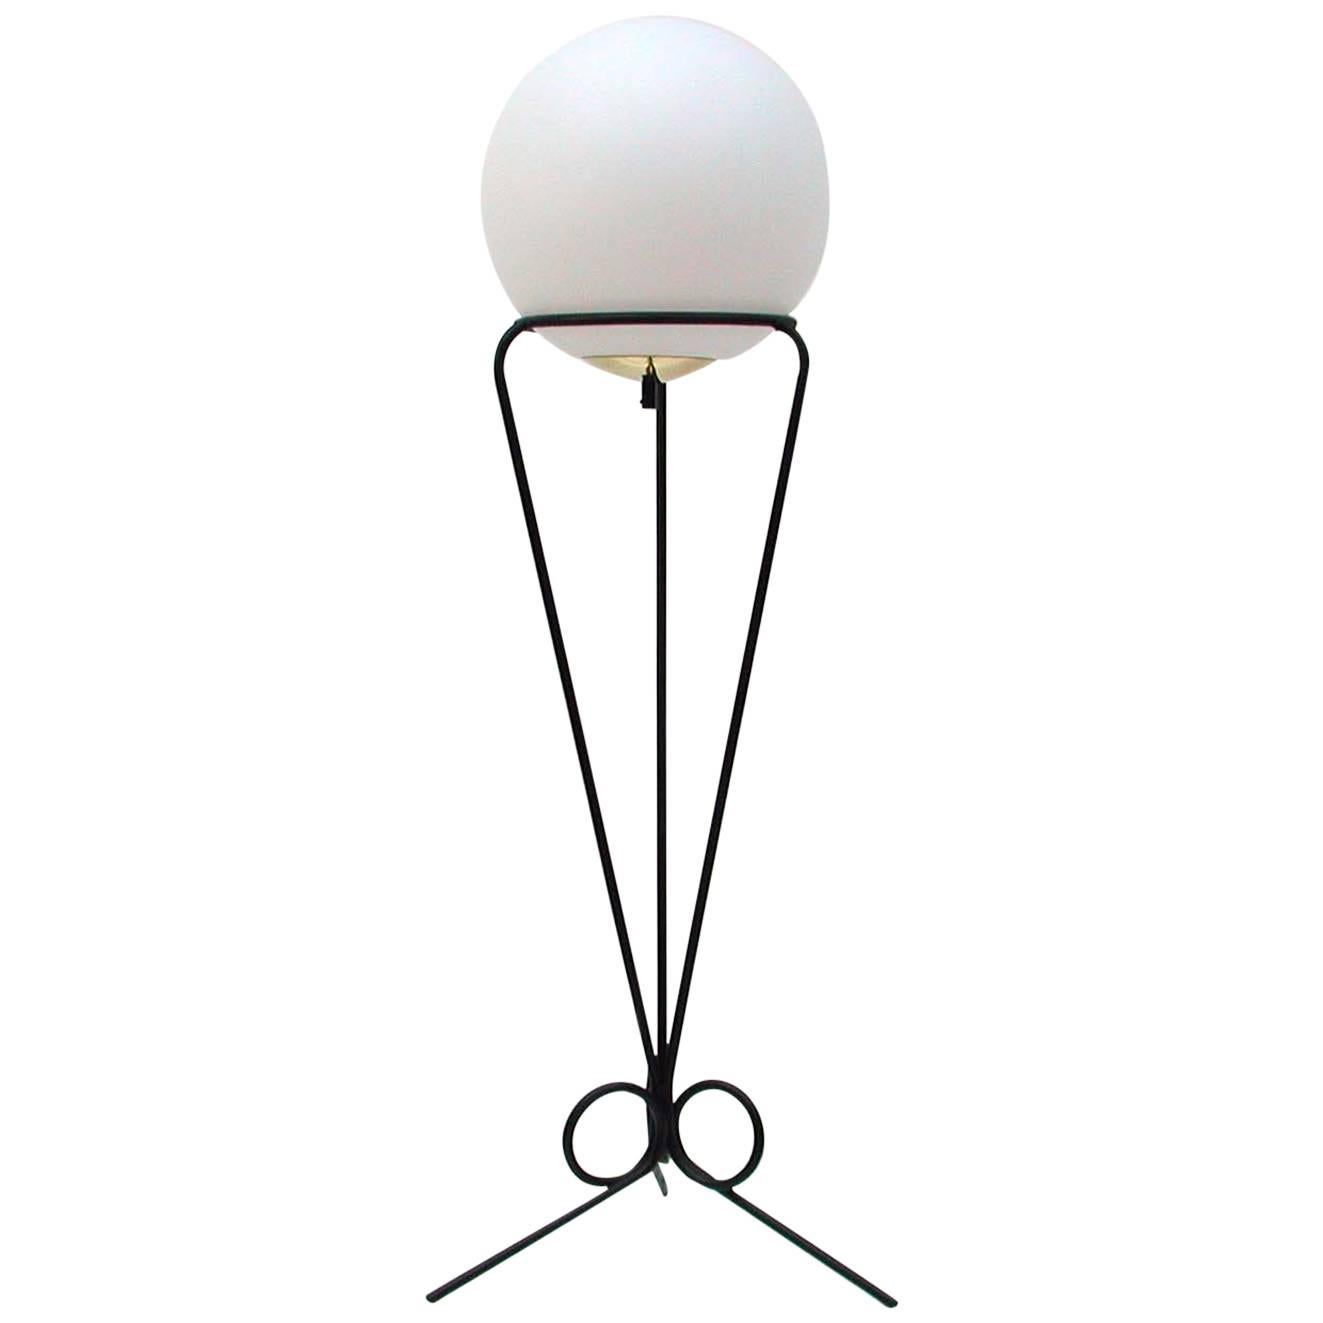 French, 1950s Moon Floor Lamp in the Manner of Jean Royère